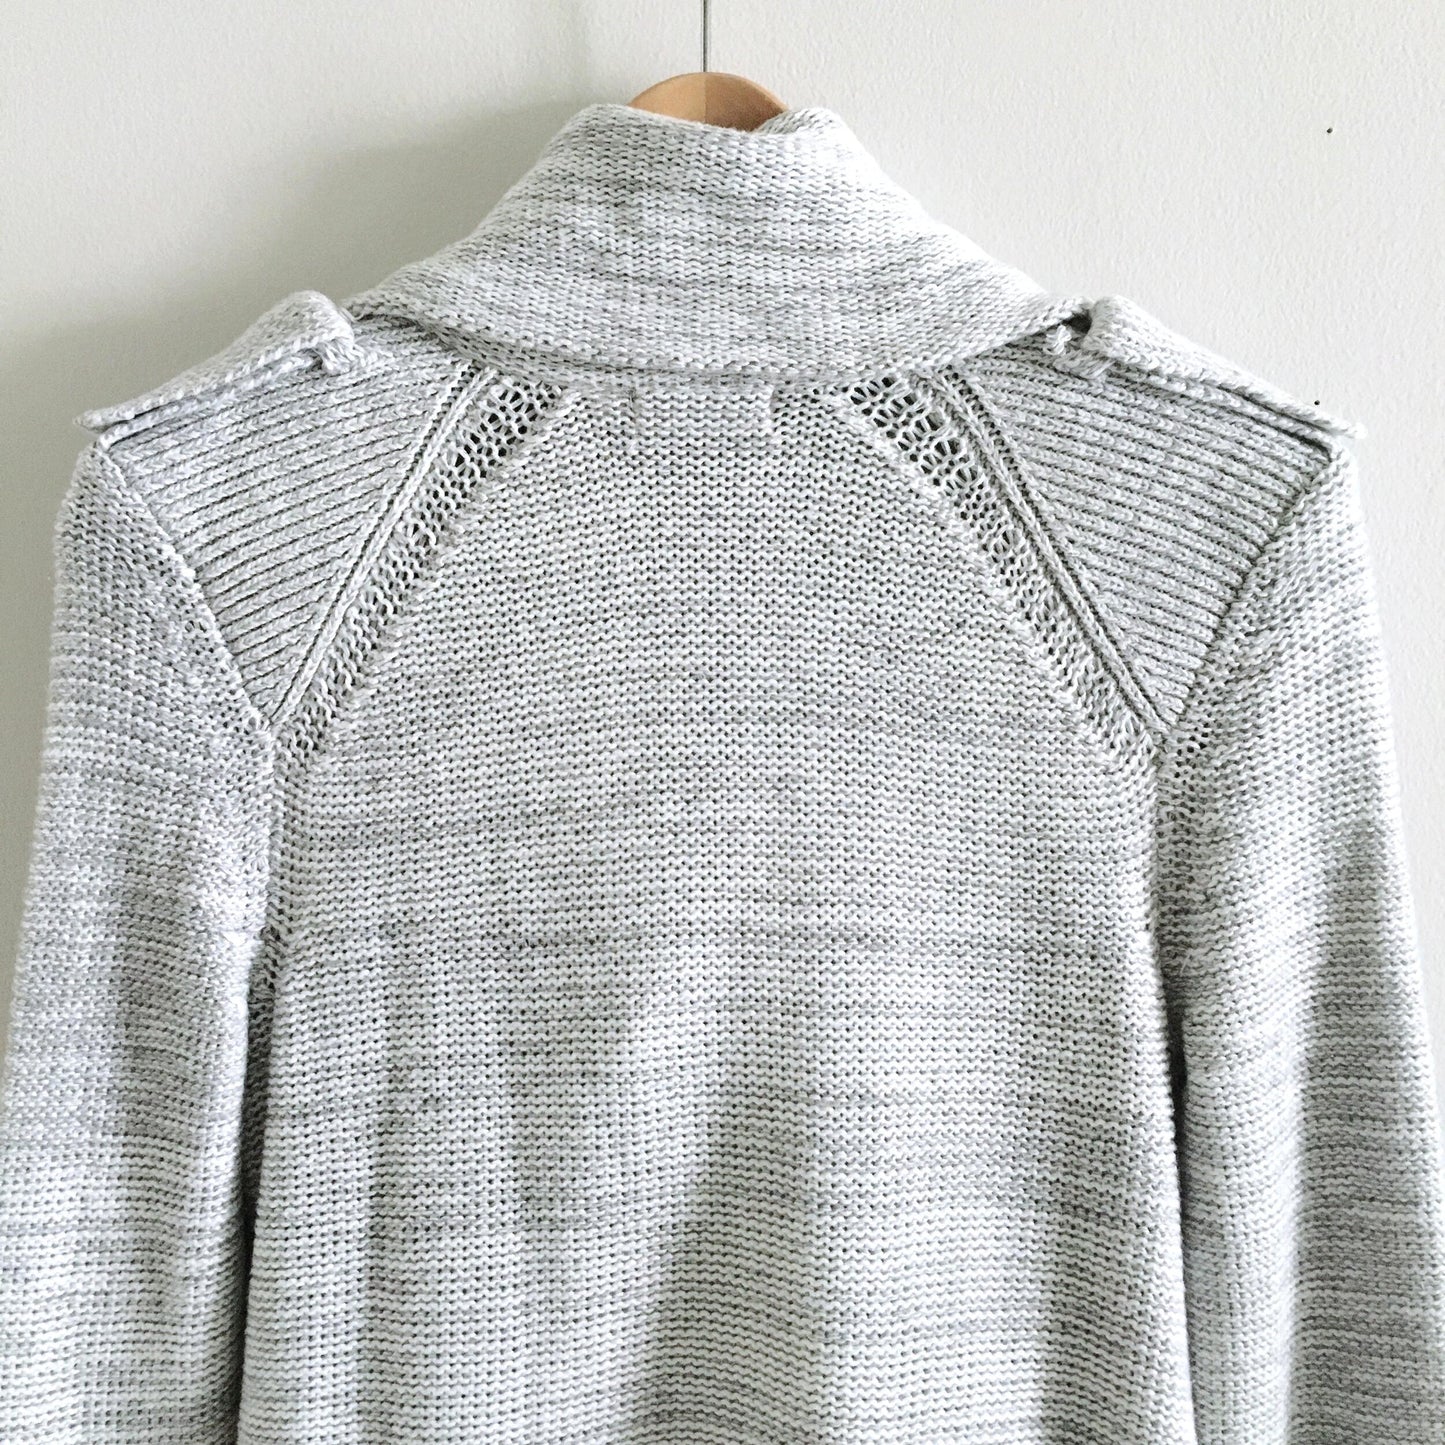 firth heather zip sweater cardigan jacket - size small